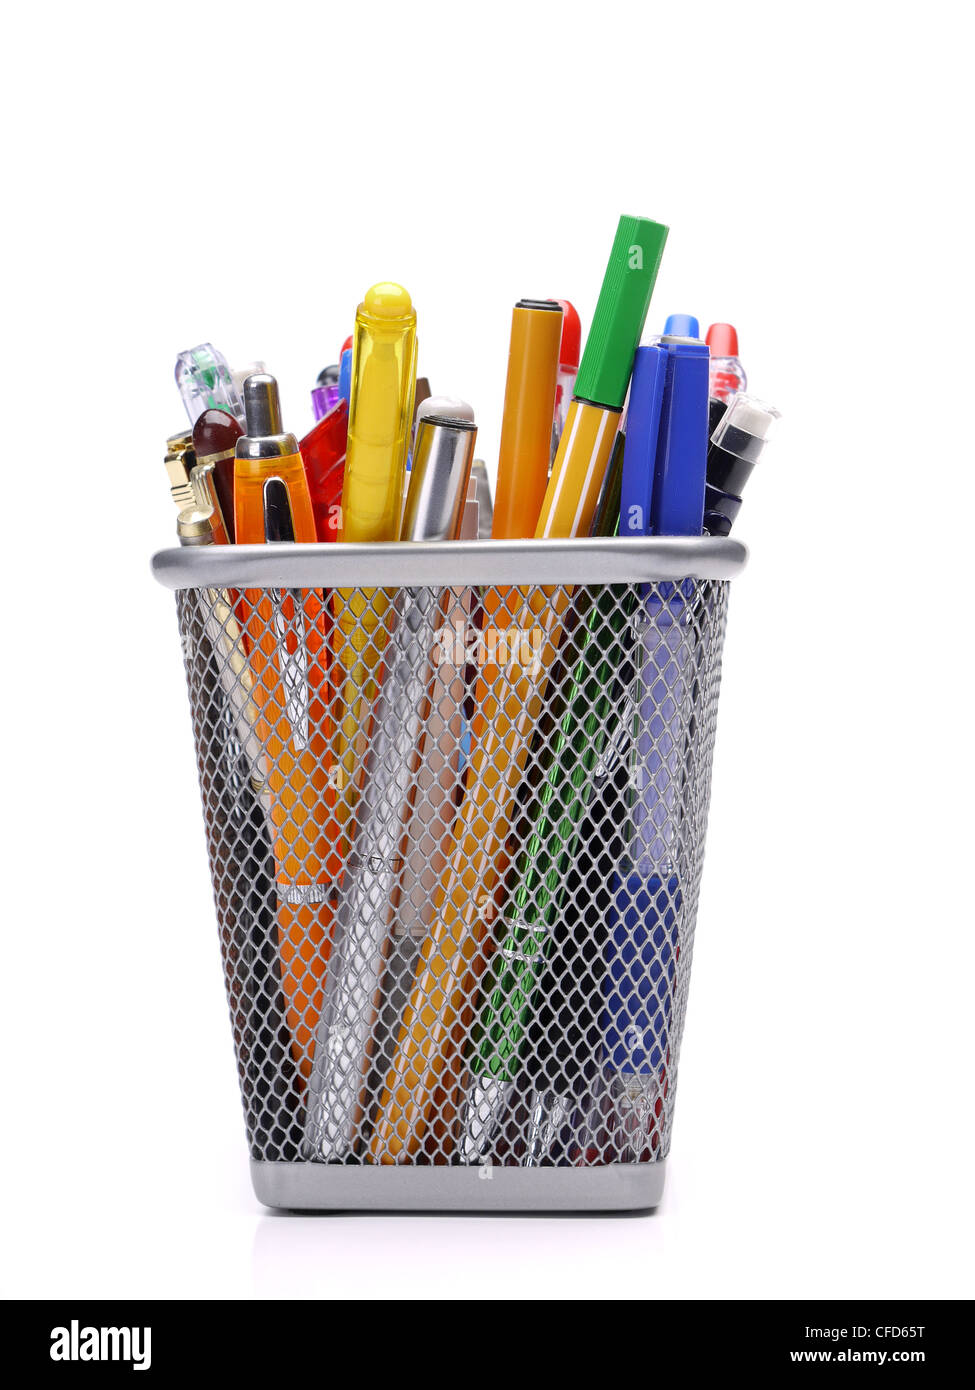 Metal mesh container full of writing tools shot over white background Stock Photo